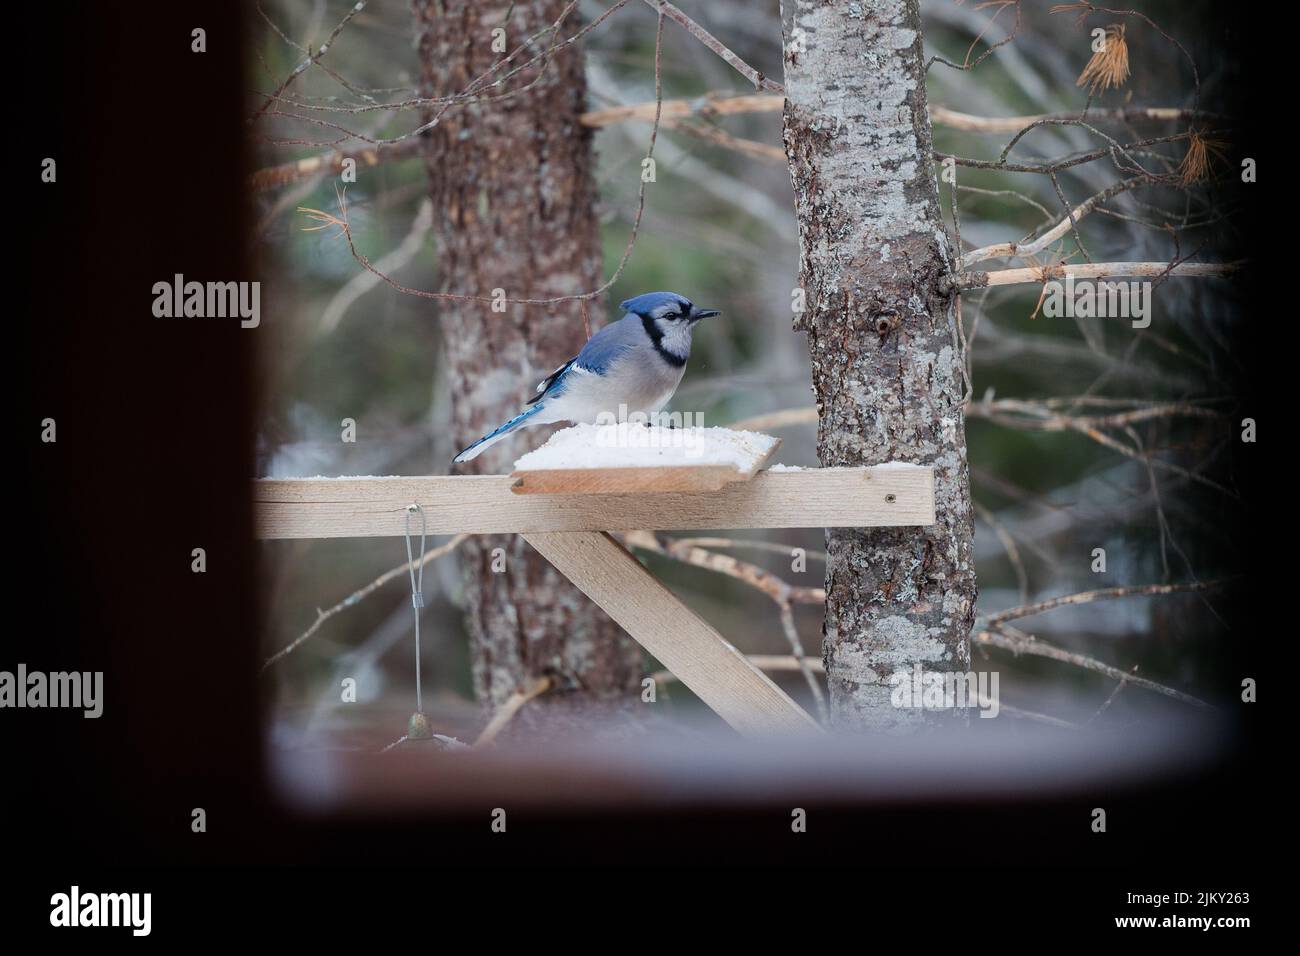 A tiny blue Jay bird sitting on wooden structure Stock Photo